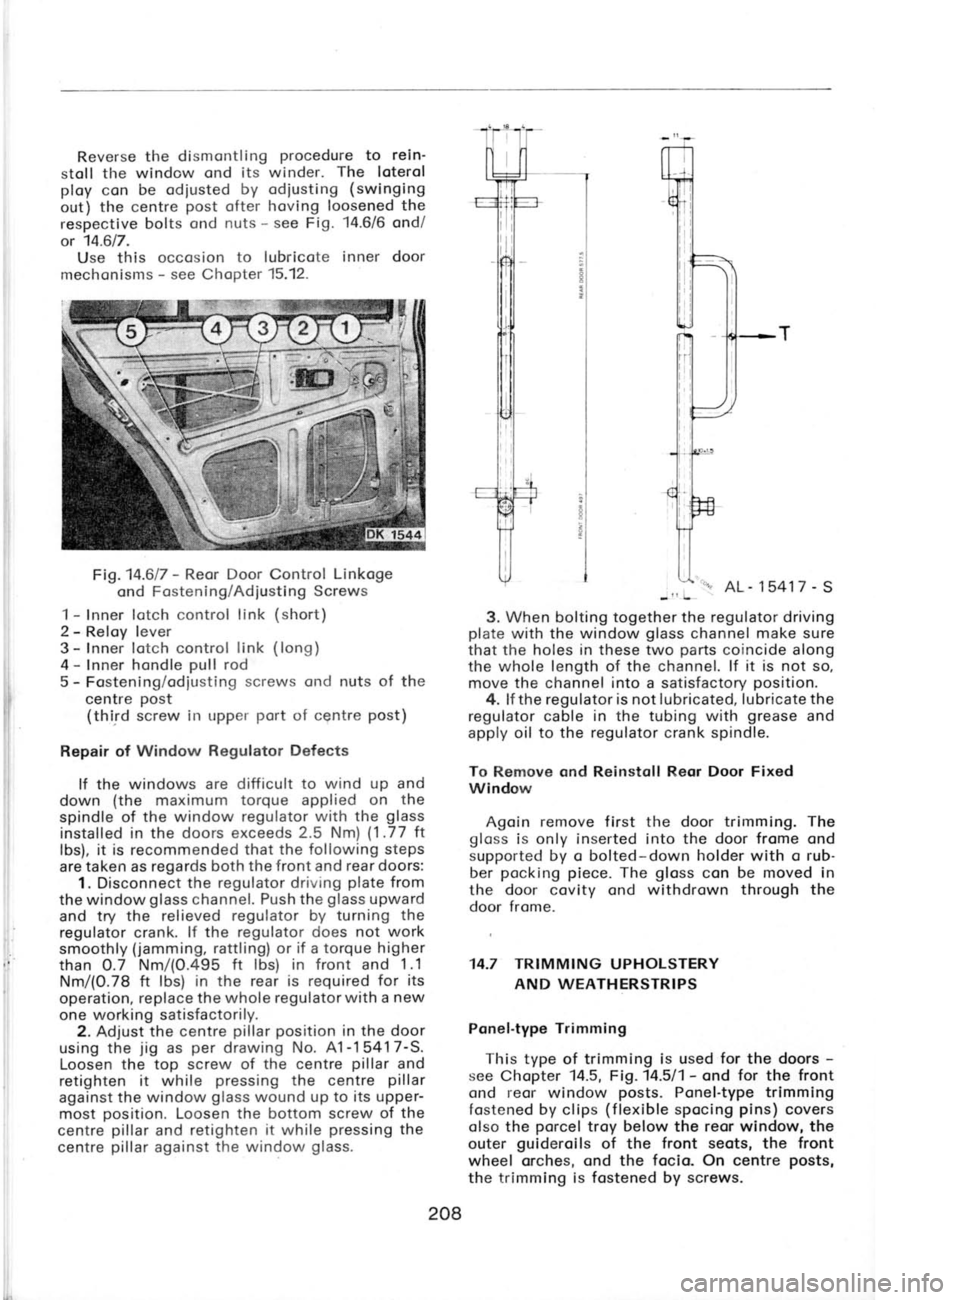 SKODA 120 LS 1980  Workshop Manual Reverse 
the 
dismontling  procedure 
to rein
stoll  tl-re window  ond its winder.  The 
loterol
ploy  con be odiusted  by  odiusting  (swinging
out) the centre  post 
ofter  hoving  loosened the
res